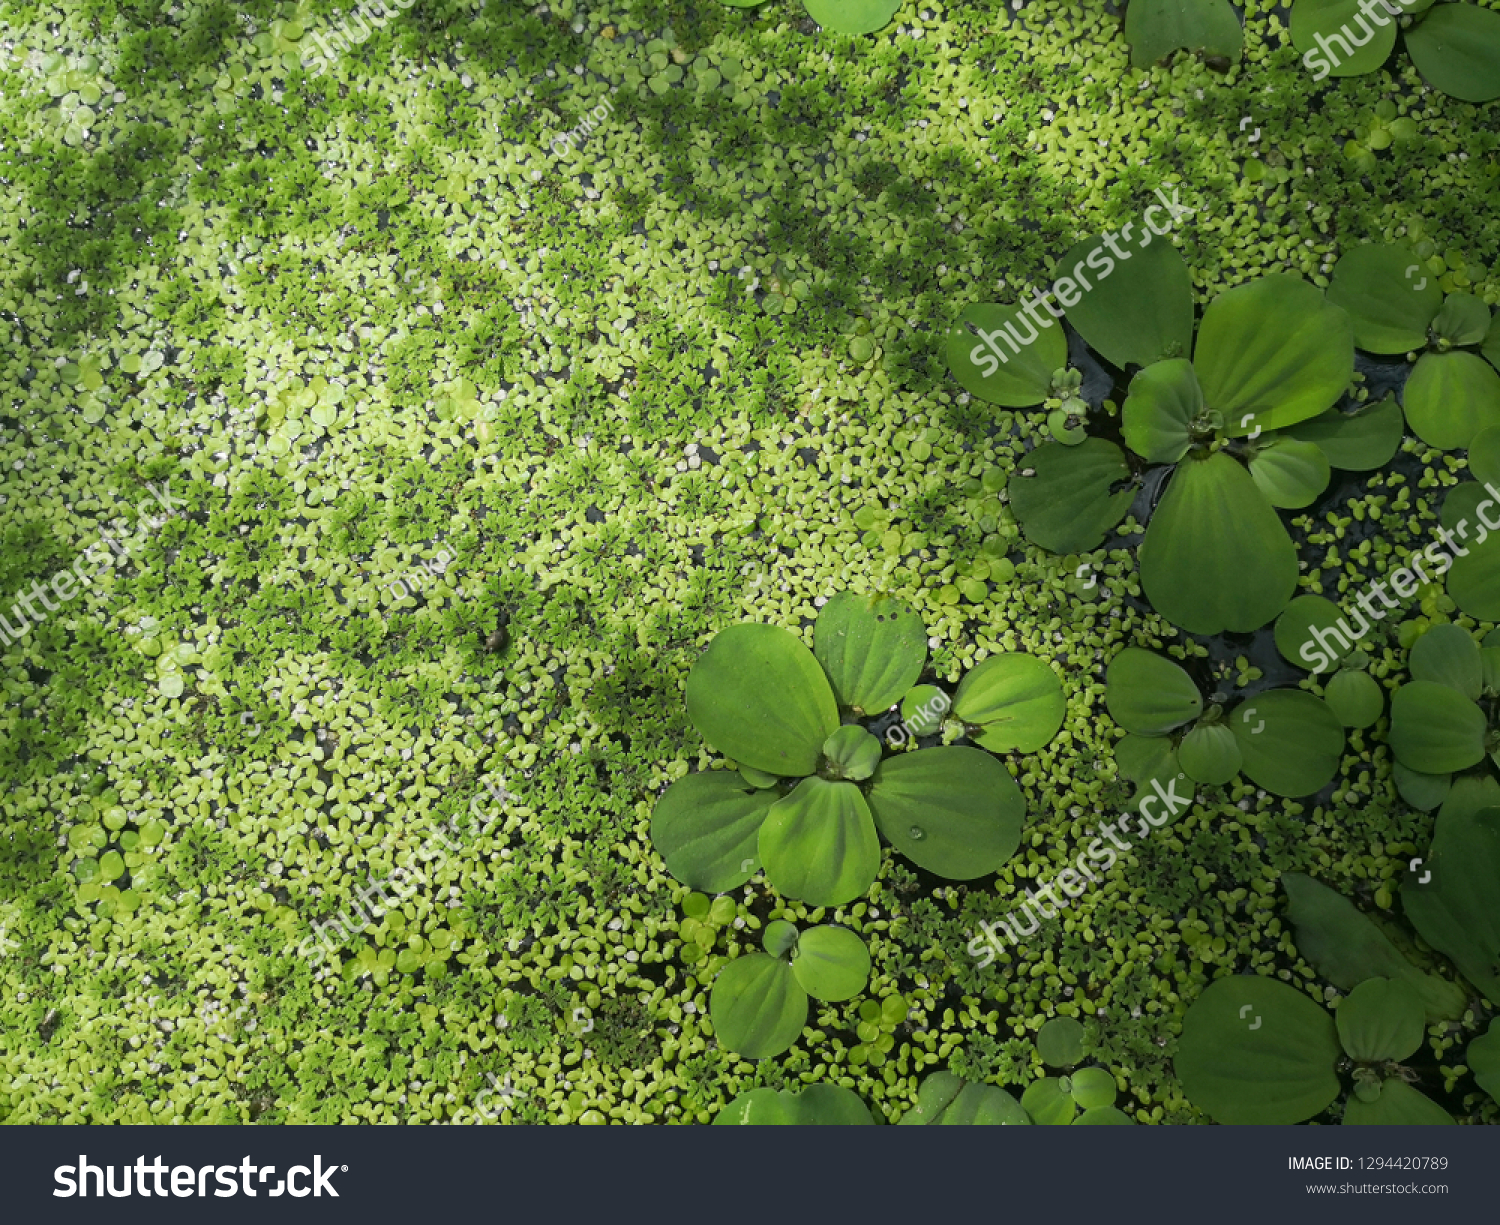 Green leaf texture: Duckweed or water lettuce is leaves natural background on water, Aquatic Plant,Lemnoideae is floating pond plant.small aquatic plant.selective focus and free space for text. #1294420789